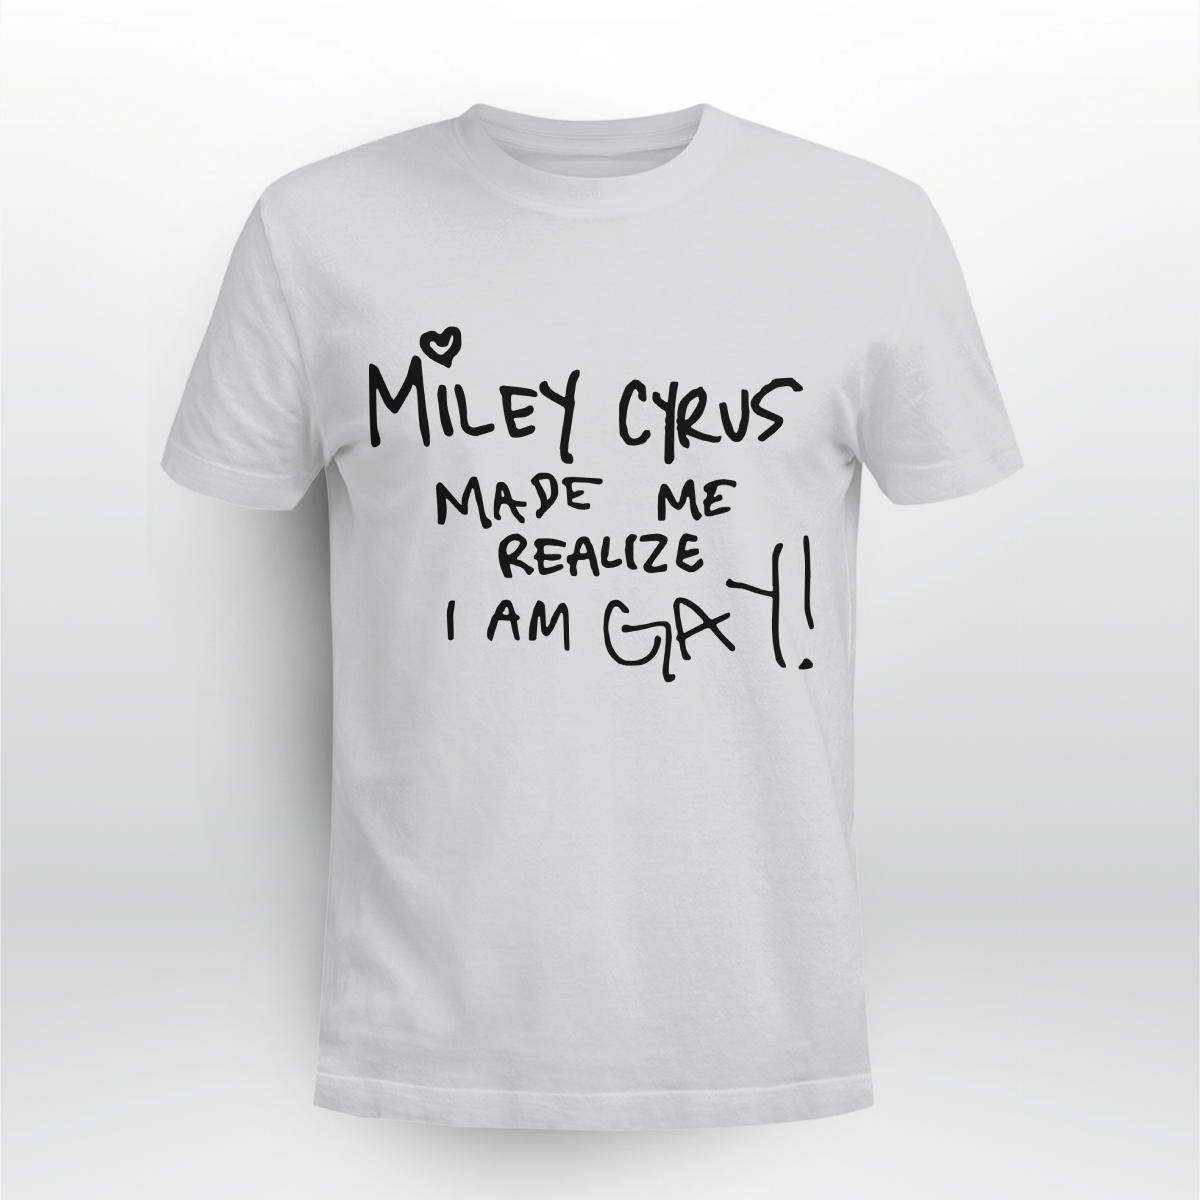 Miley Cyrus Made Me Realize I Am Gay Shirt Style: Unisex T-shirt, Color: Ash